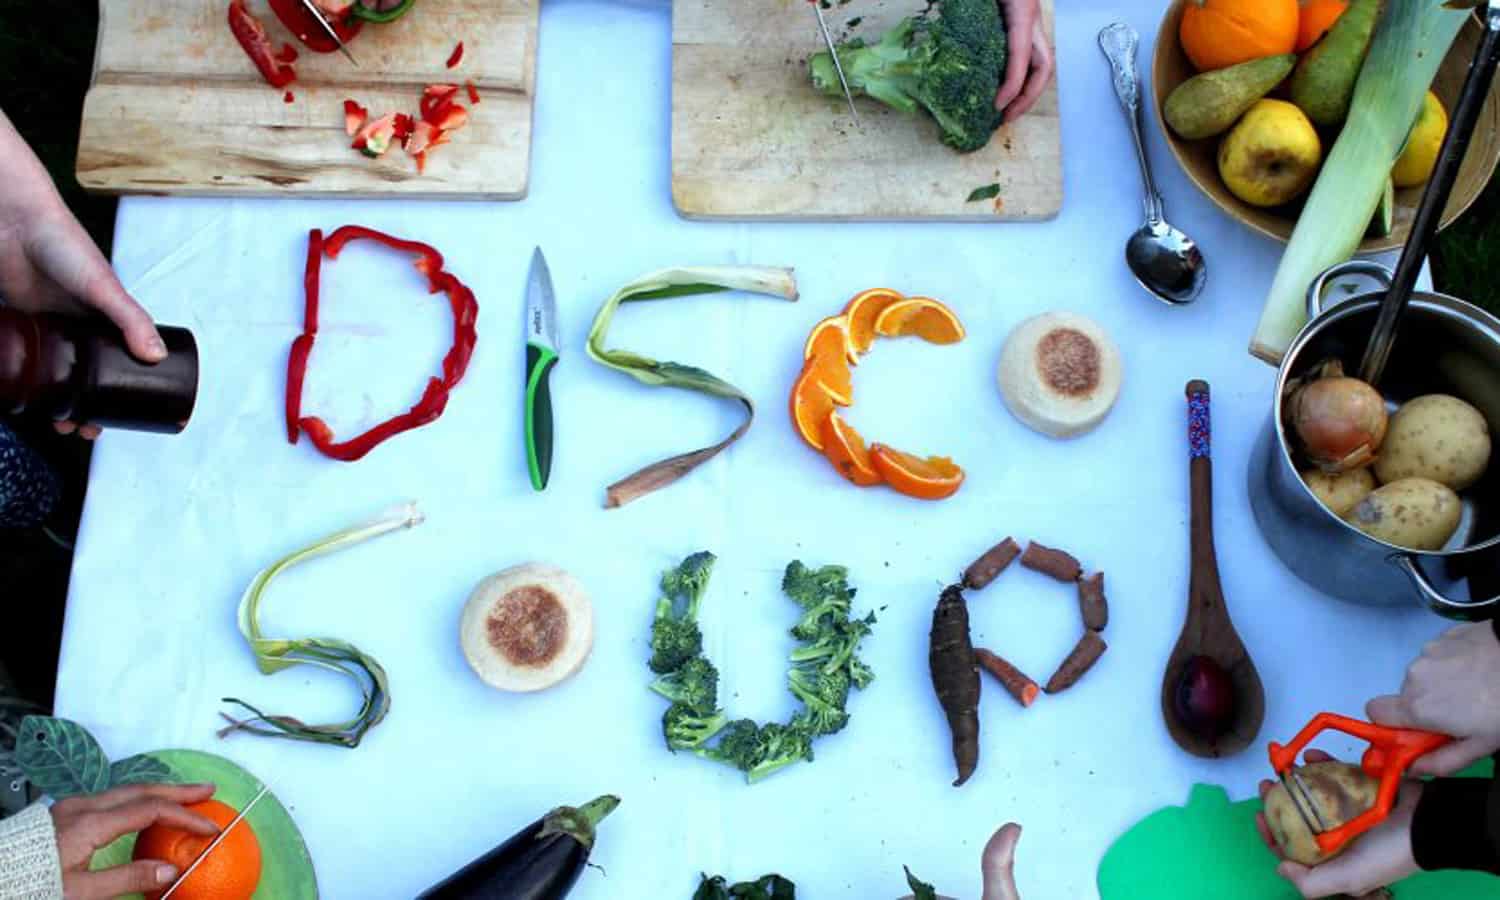 Feast and fight food waste April 29 at World Disco Soup Day, the largest food waste education event in history.